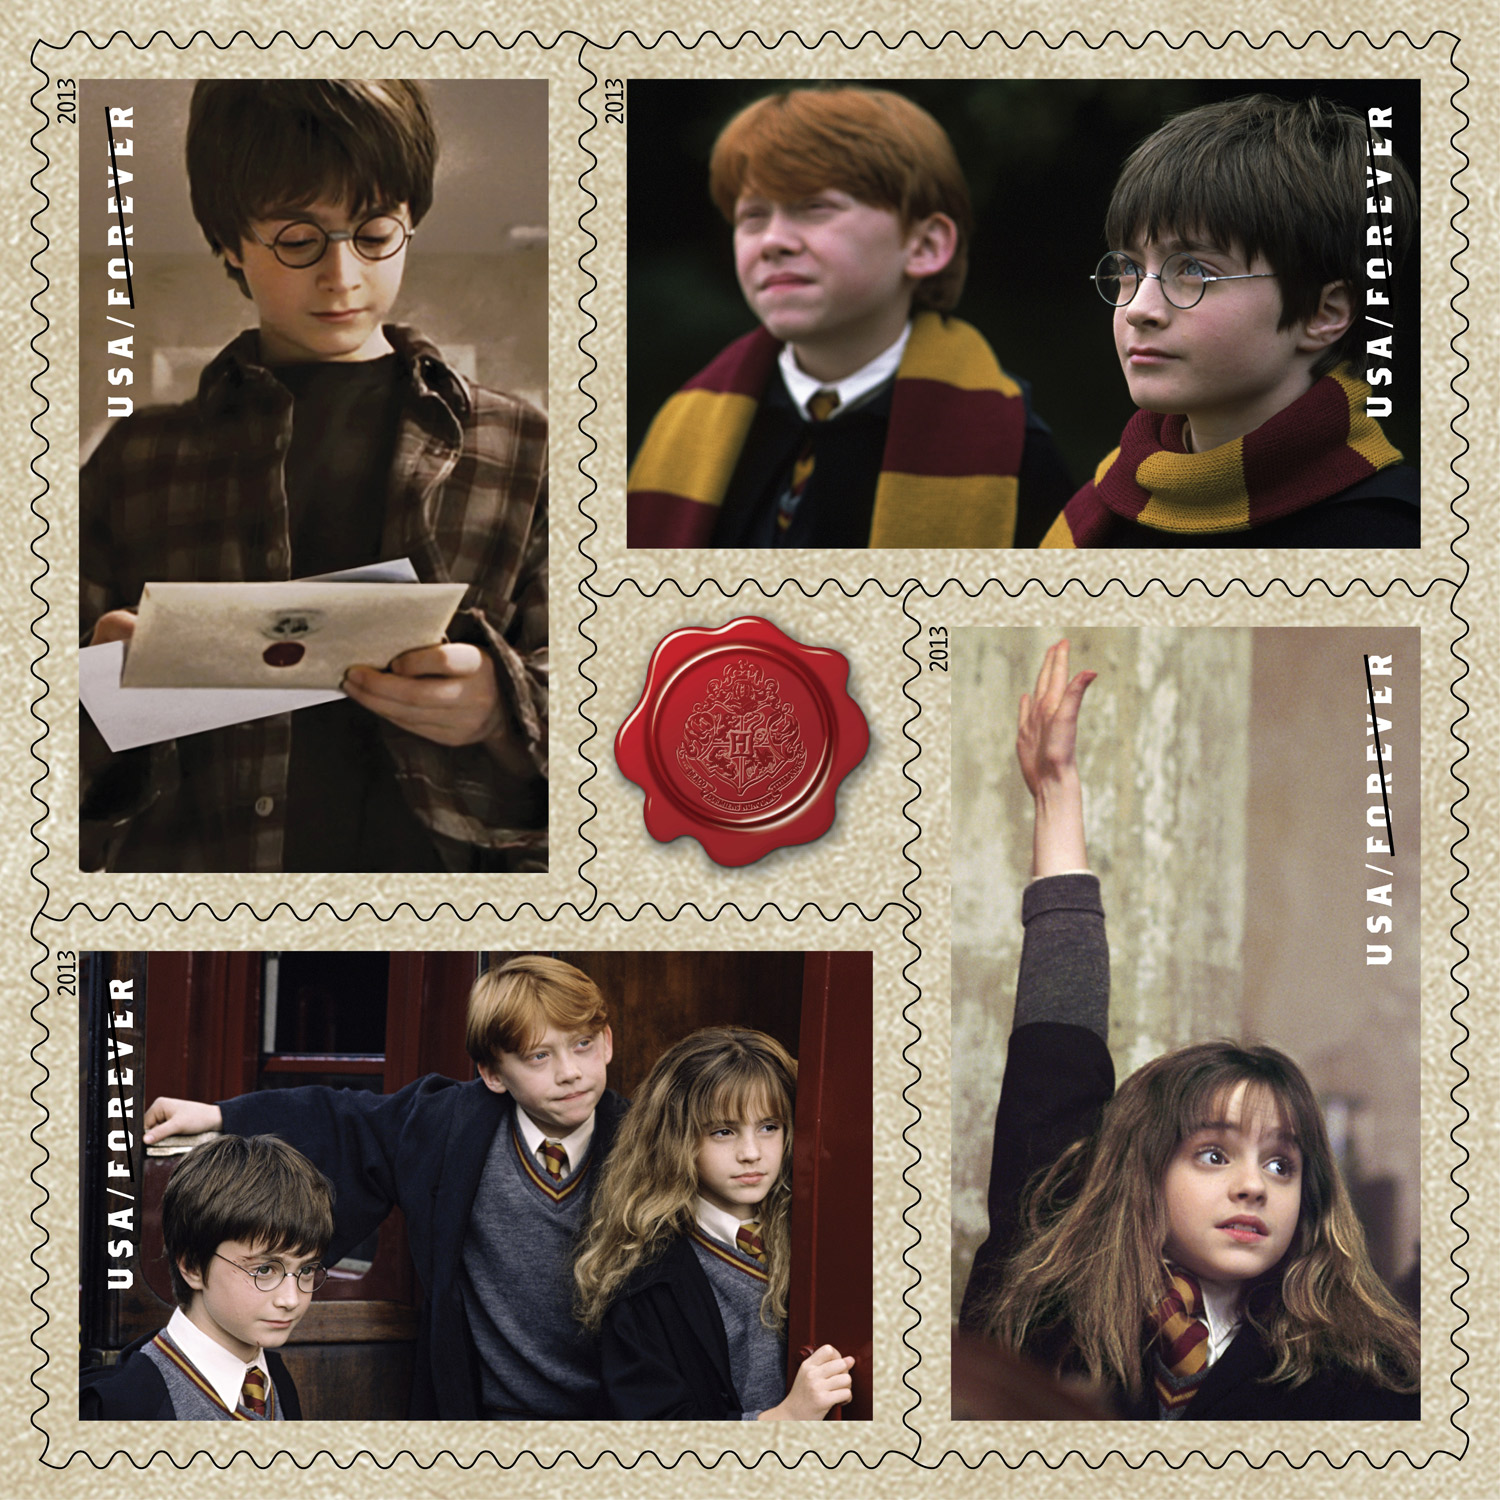 Harry Potter Stamps Chad 2021 MNH Philosopher's Stone Hermione Ron